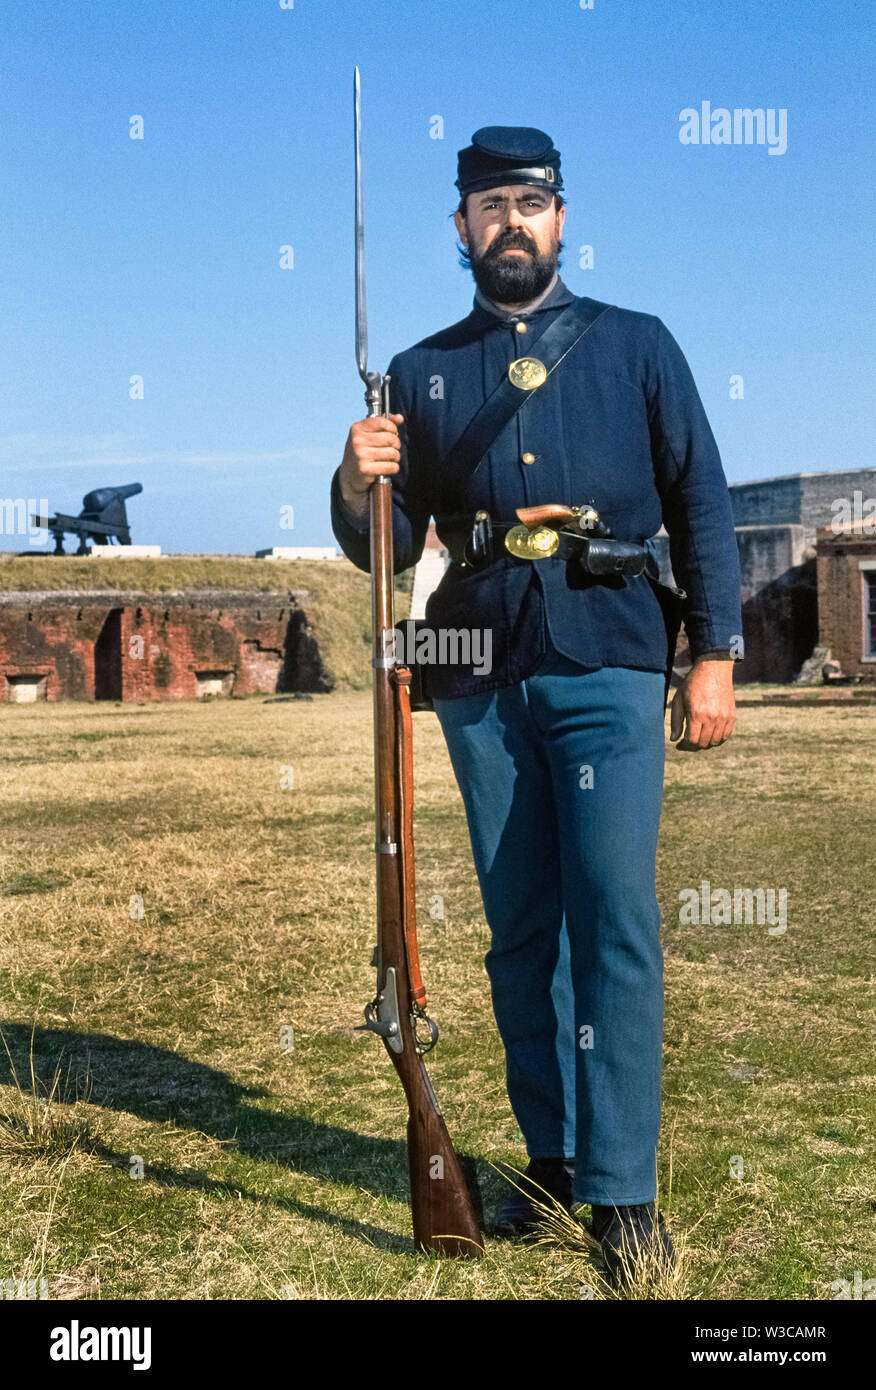 A bearded man wearing the military uniform of a U.S. Civil War Union soldier poses with weapons he carries as an interpreter who greets visitors to Fort Clinch State Park in Fernandina Beach on the east coast of Florida, USA. His right hand holds a Springfield rifled musket with its bayonet attached, and a pistol is tucked in the leather belt around his waist that also carries ammunition. This historic fort at the entrance to Cumberland Sound and the St. Mary’s River was initially occupied by the Confederate Army until it came under control of Union troops in 1862. Stock Photo